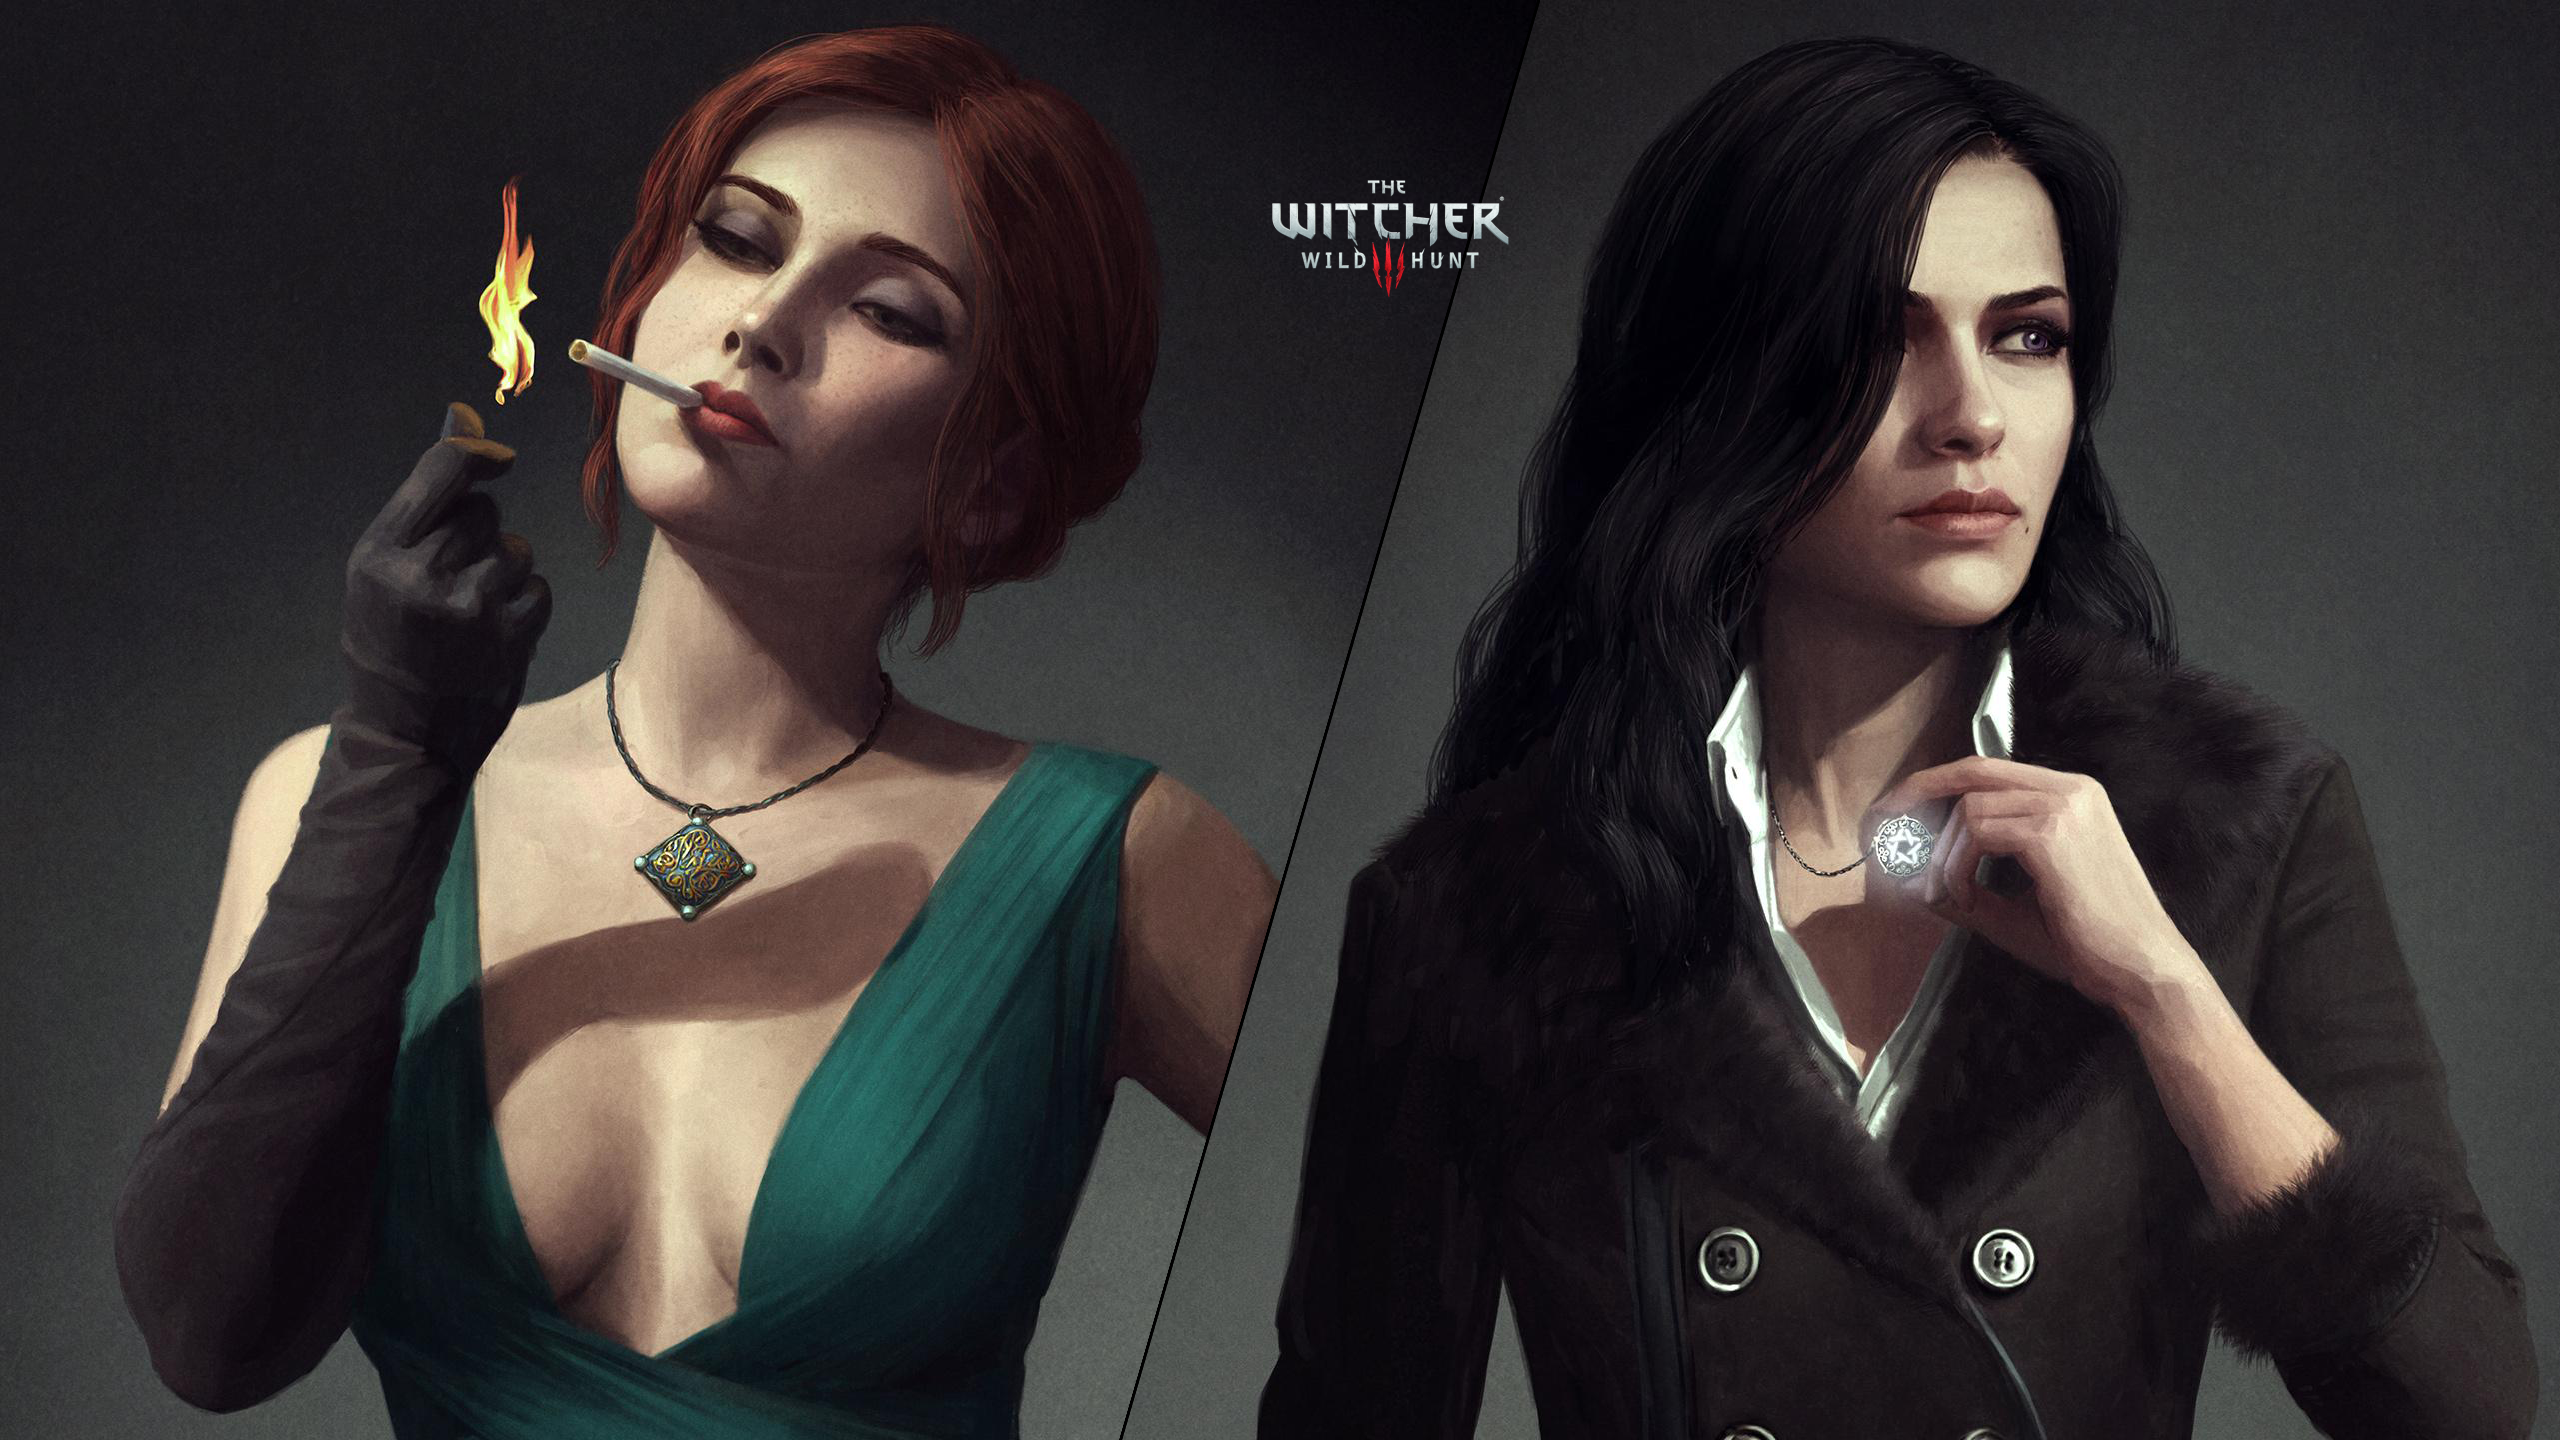 General 2560x1440 The Witcher 3: Wild Hunt Triss Merigold Yennefer of Vengerberg The Witcher Ástor Alexander video game characters digital art logo video games smoking necklace